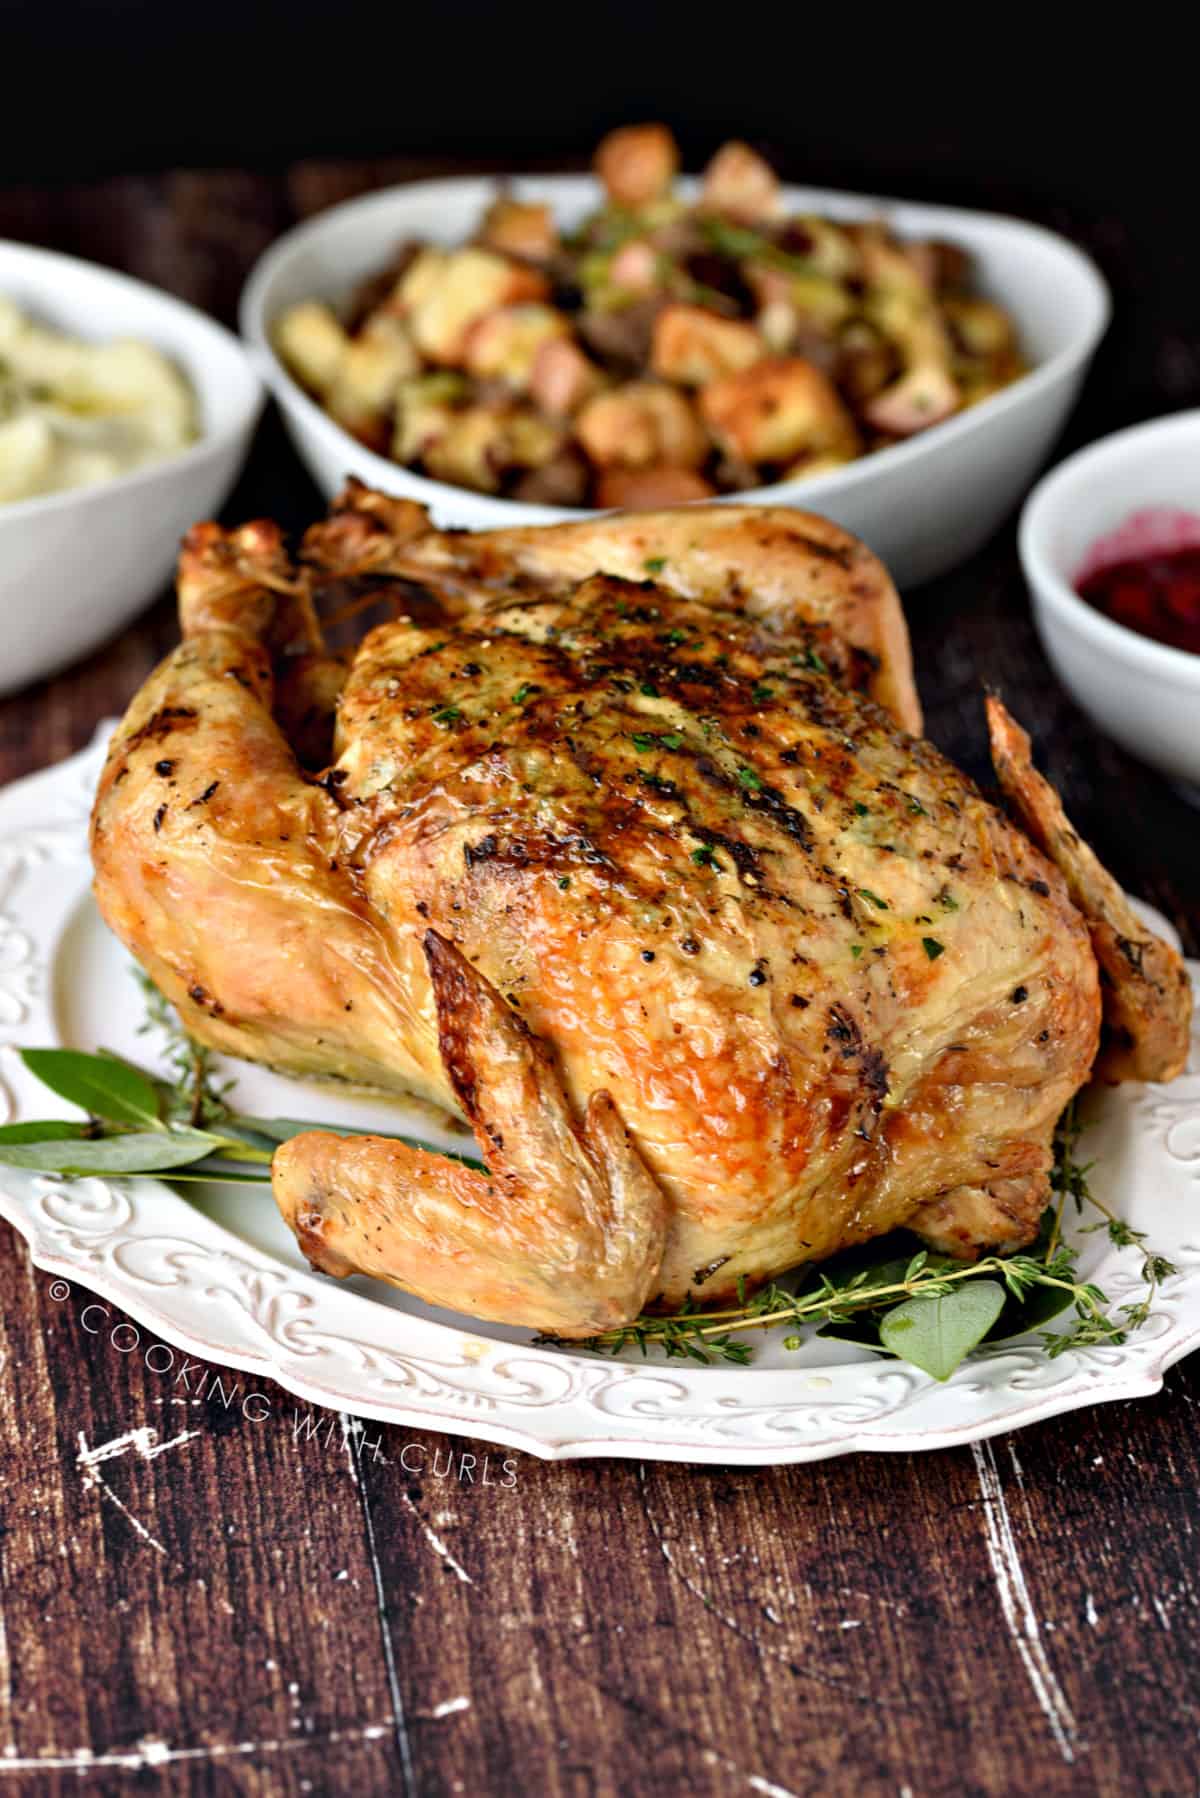 A whole roast chicken on a white platter with bay leaves and thyme with bowls of stuffing and mashed potatoes in the background.